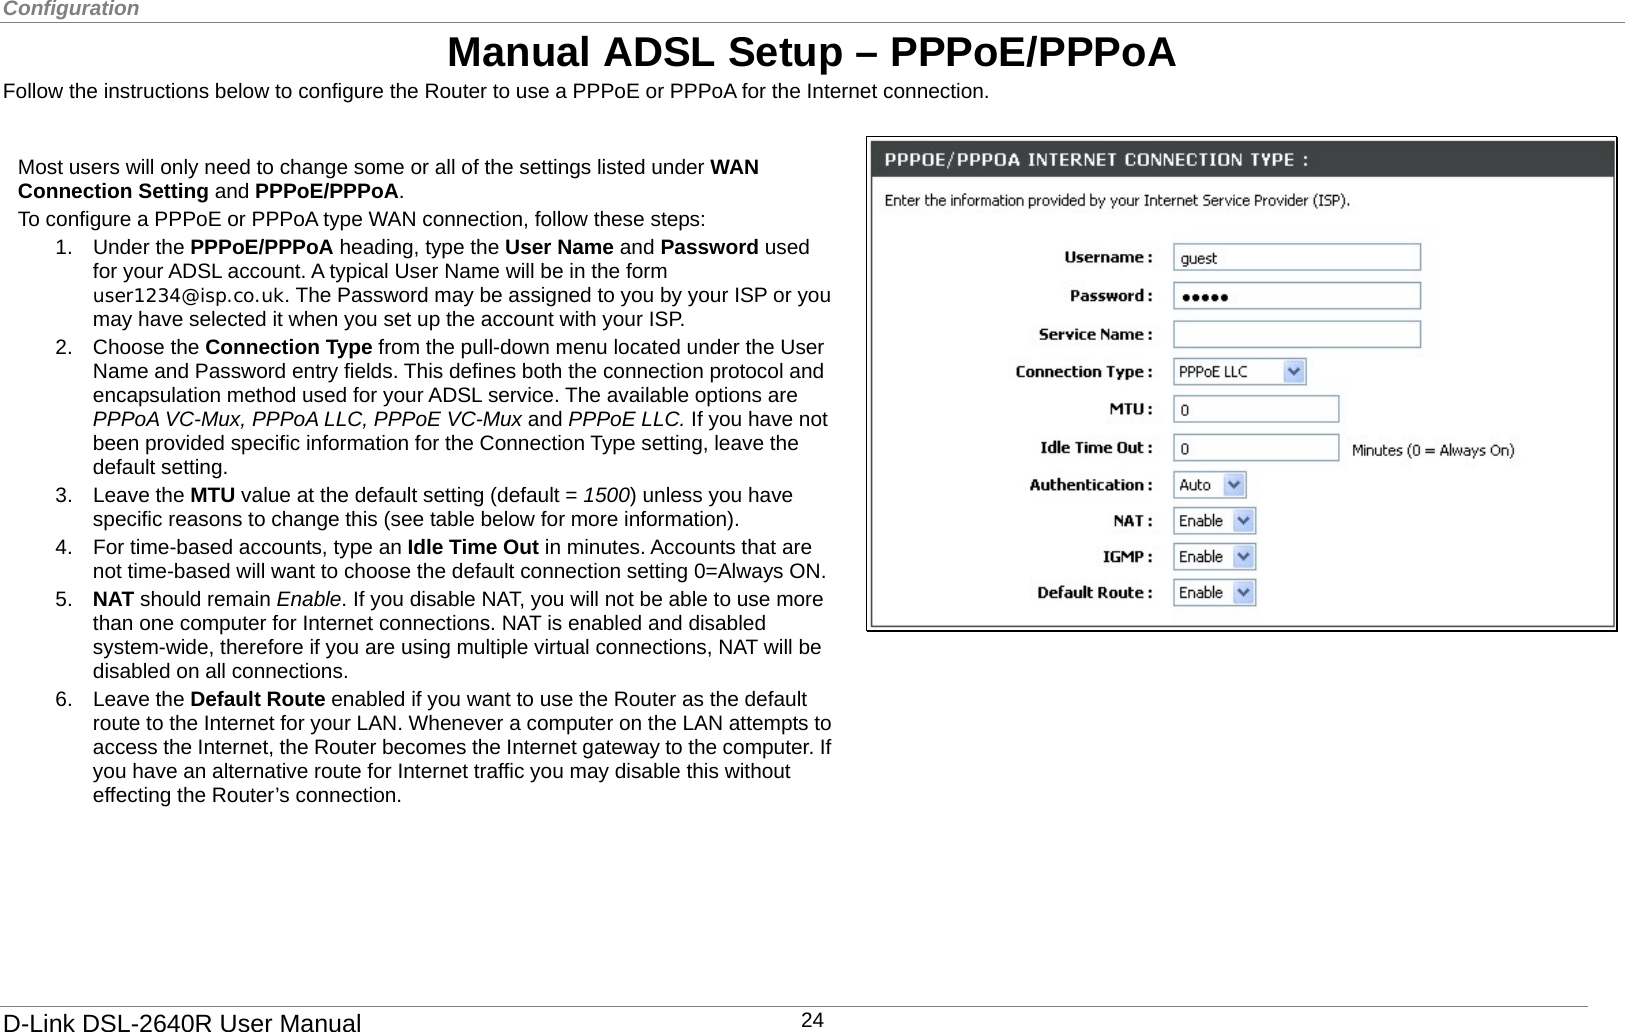 Configuration  Manual ADSL Setup – PPPoE/PPPoA Follow the instructions below to configure the Router to use a PPPoE or PPPoA for the Internet connection.     1. Under the PPPoE/PPPoA heading, type the User Name and Password used for your ADSL account. A typical User Name will be in the form user1234@isp.co.uk. The Password may be assigned to you by your ISP or you may have selected it when you set up the account with your ISP.   2. Choose the Connection Type from the pull-down menu located under the User Name and Password entry fields. This defines both the connection protocol and encapsulation method used for your ADSL service. The available options are PPPoA VC-Mux, PPPoA LLC, PPPoE VC-Mux and PPPoE LLC. If you have not been provided specific information for the Connection Type setting, leave the default setting. 3. Leave the MTU value at the default setting (default = 1500) unless you have specific reasons to change this (see table below for more information). 4.  For time-based accounts, type an Idle Time Out in minutes. Accounts that are not time-based will want to choose the default connection setting 0=Always ON.5.  NAT should remain Enable. If you disable NAT, you will not be able to use more than one computer for Internet connections. NAT is enabled and disabled system-wide, therefore if you are using multiple virtual connections, NAT will be disabled on all connections. 6. Leave the Default Route enabled if you want to use the Router as the default route to the Internet for your LAN. Whenever a computer on the LAN attempts to access the Internet, the Router becomes the Internet gateway to the computer. If you have an alternative route for Internet traffic you may disable this without effecting the Router’s connection. Most users will only need to change some or all of the settings listed under WAN Connection Setting and PPPoE/PPPoA. To configure a PPPoE or PPPoA type WAN connection, follow these steps:            D-Link DSL-2640R User Manual 24